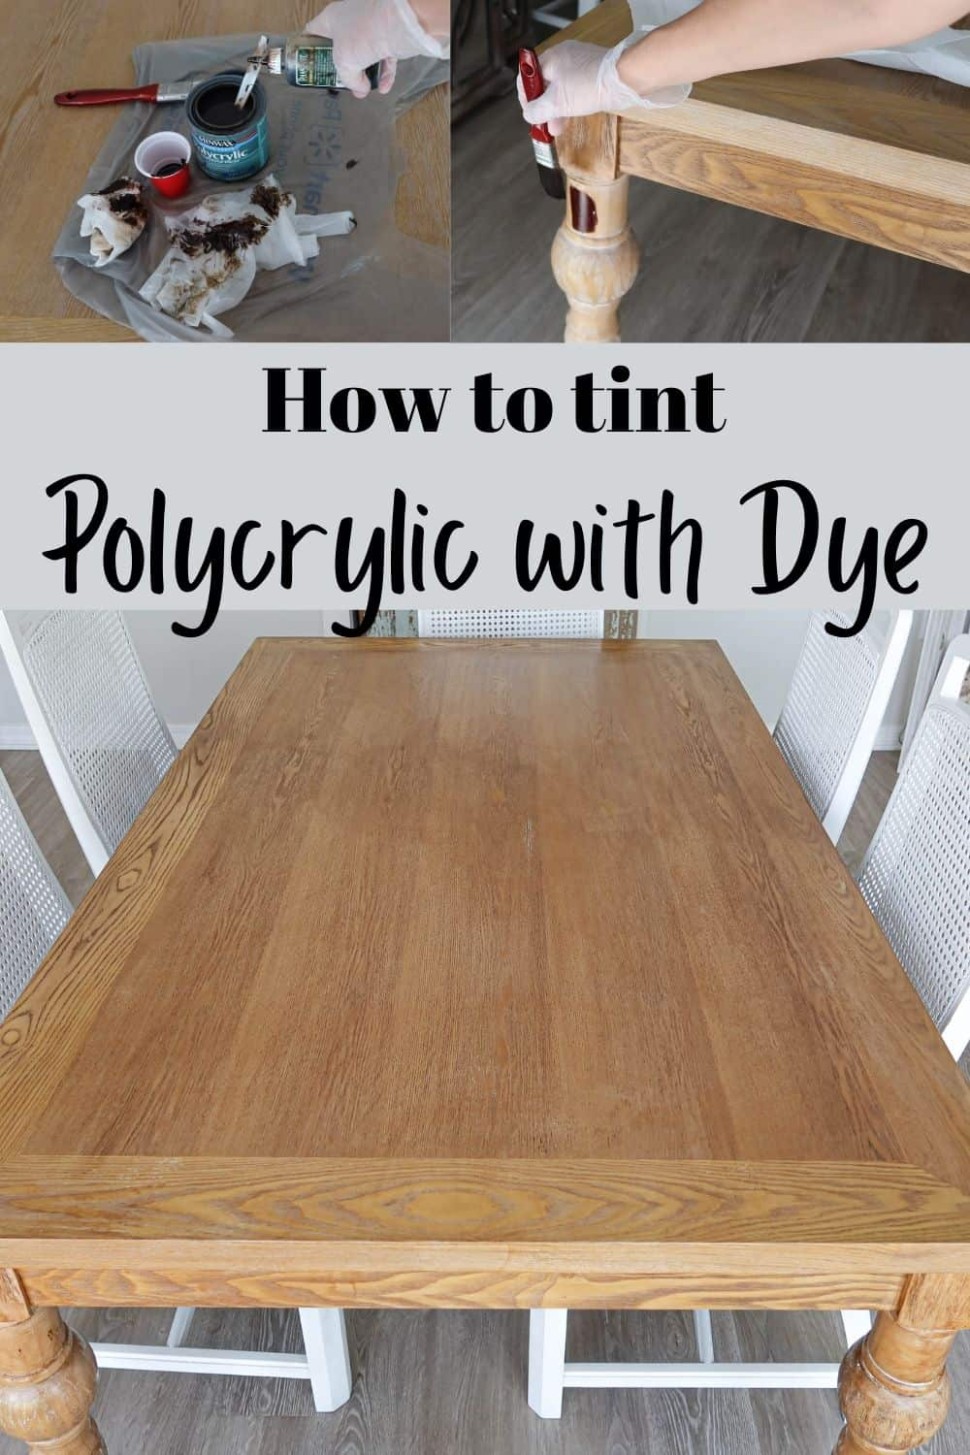 How to Add Color to a Top Coat like Polyurethane for a Tinted Sealer - can you glaze over polyurethane?